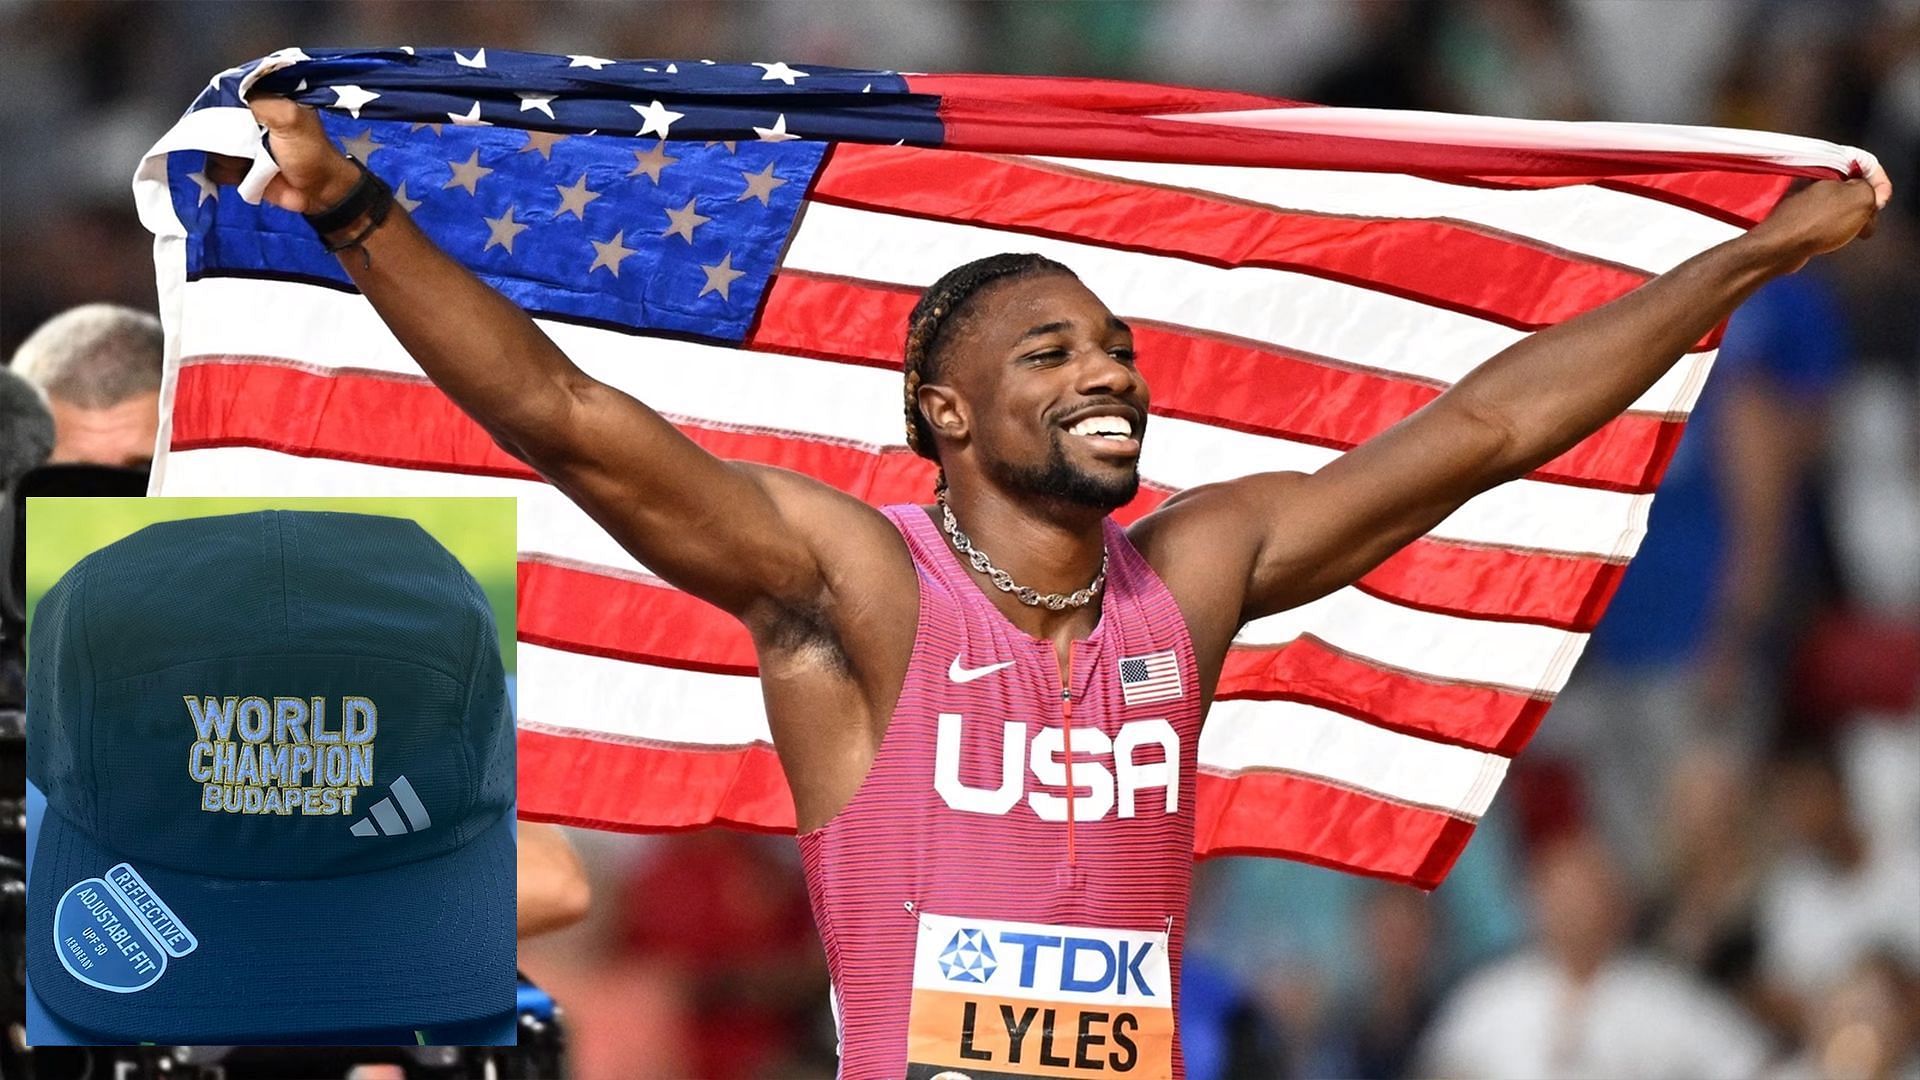 Noah Lyles at the 2023 World Athletics Championships and his Hat (Image via Sportskeeda)